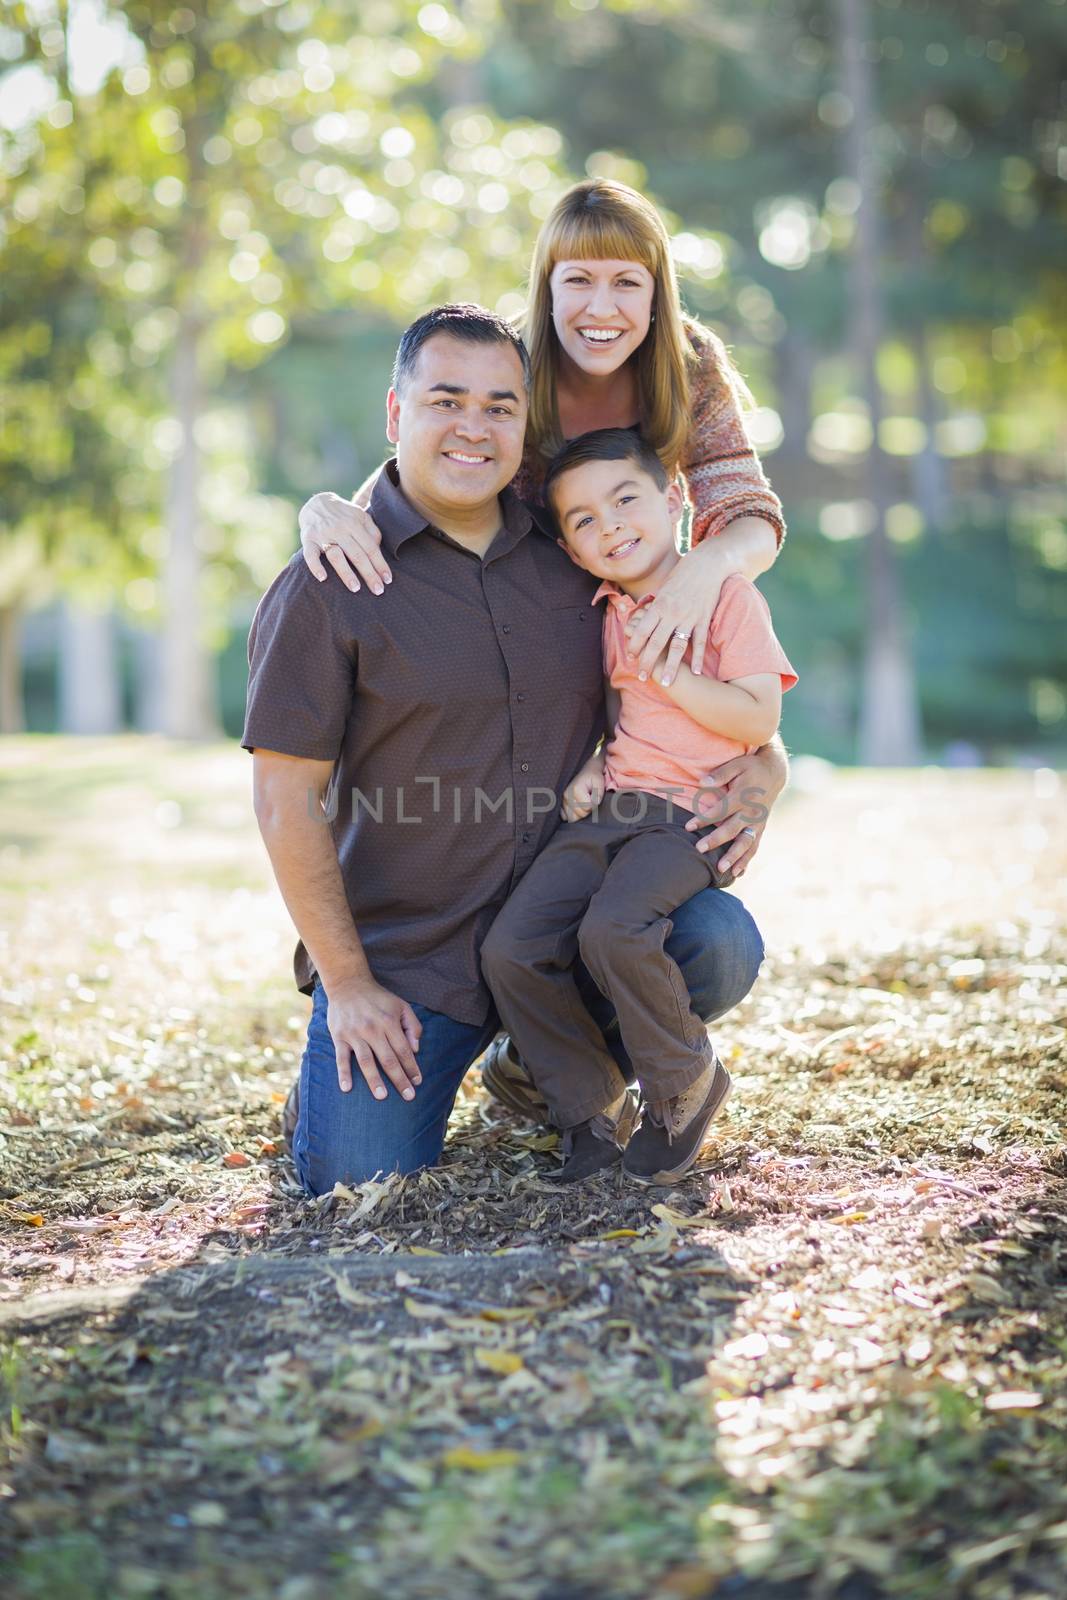 Happy Attractive Young Mixed Race Family Portrait Outdoors.